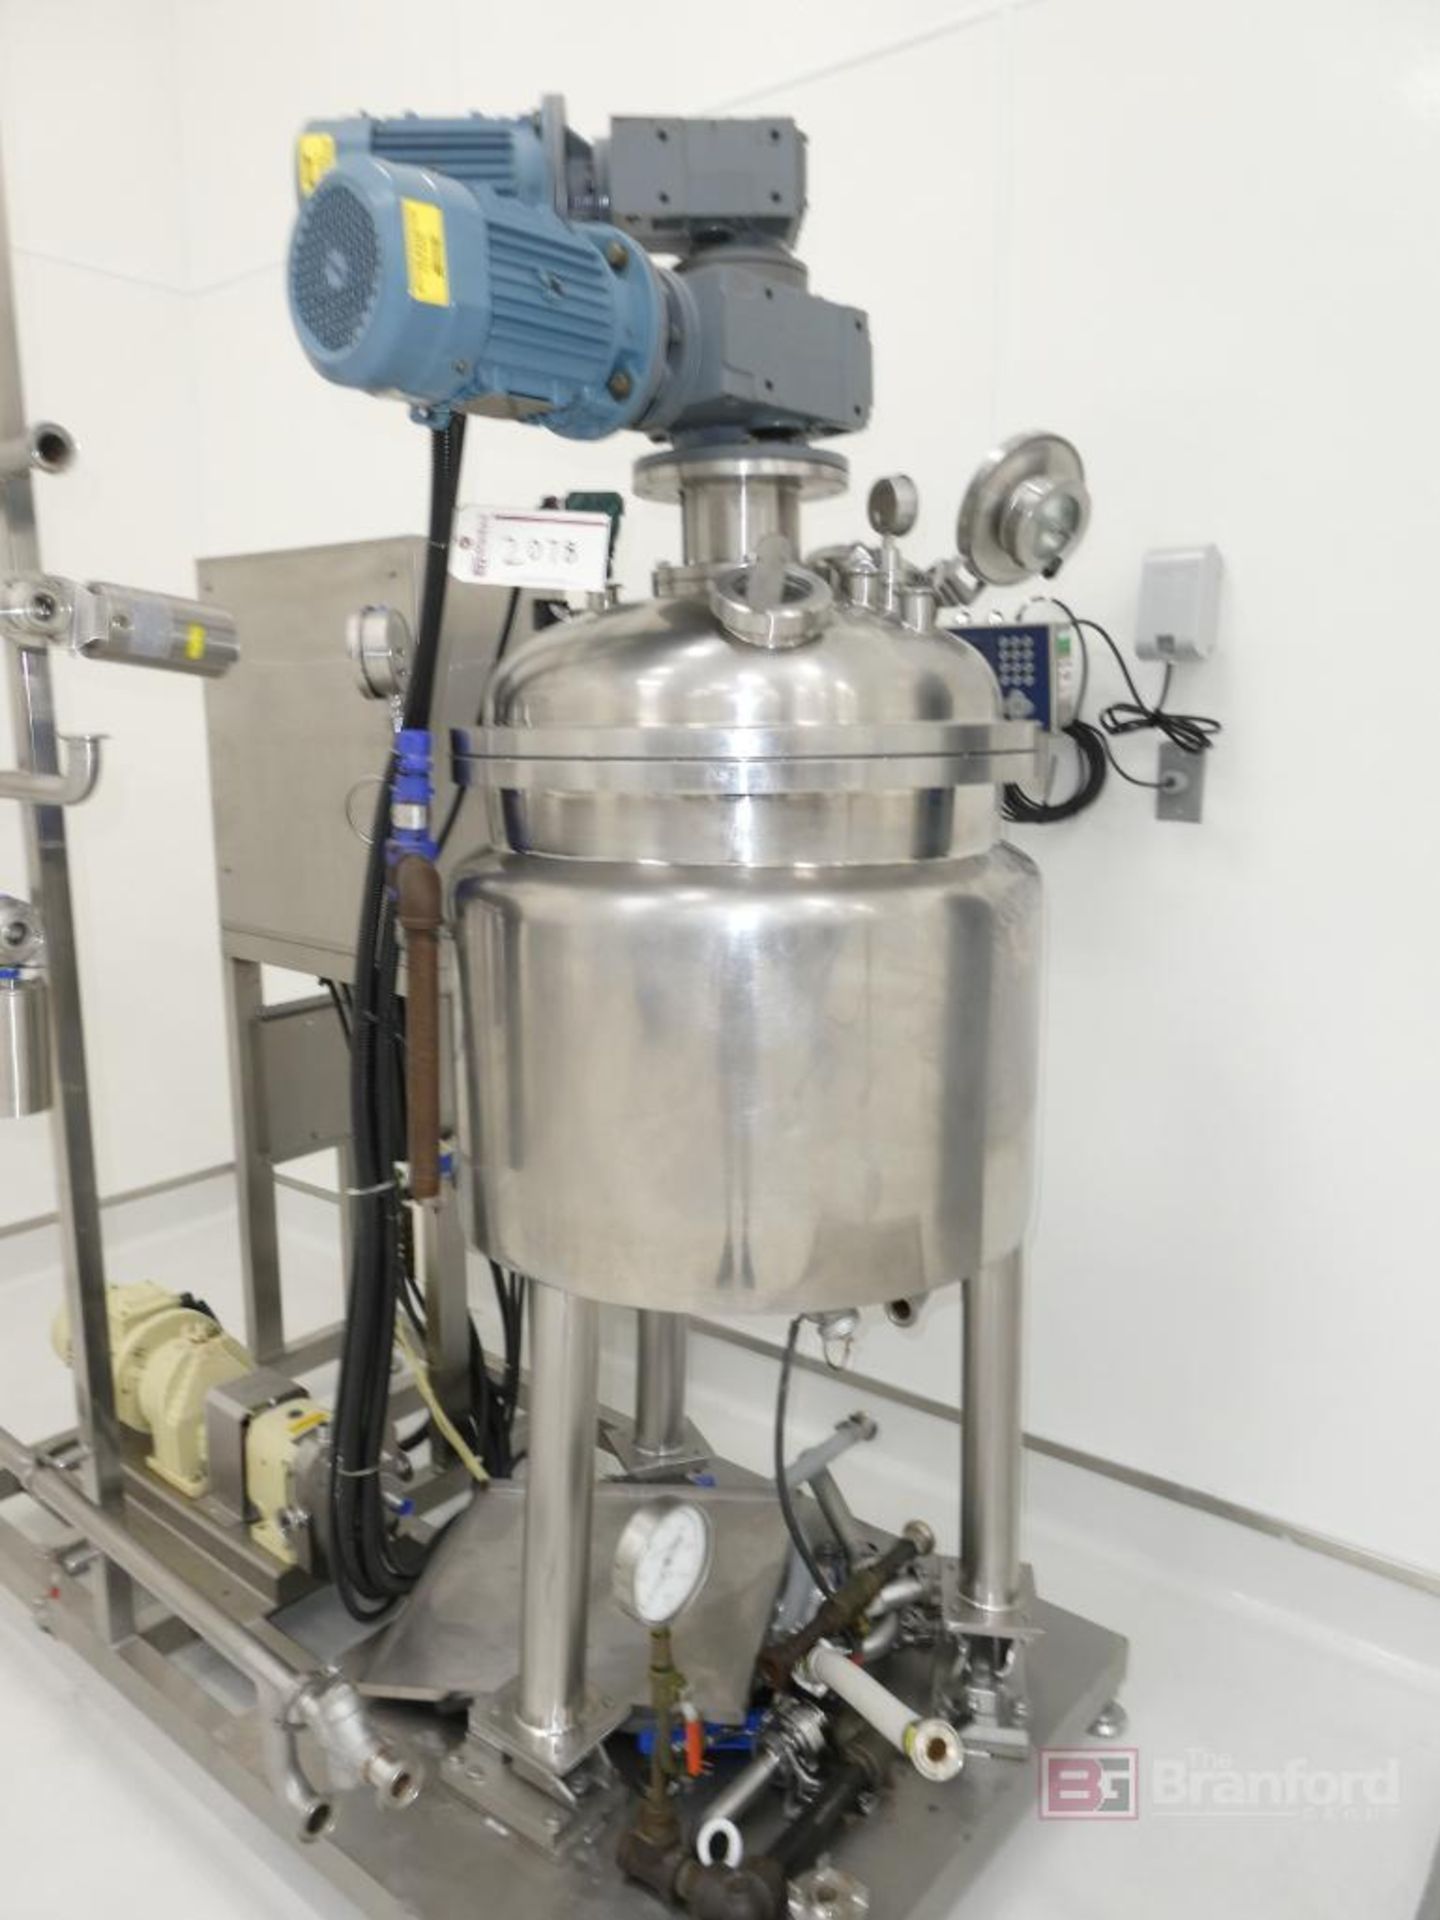 VMES-100L Stainless Steel Tank Mixing System - Image 7 of 10